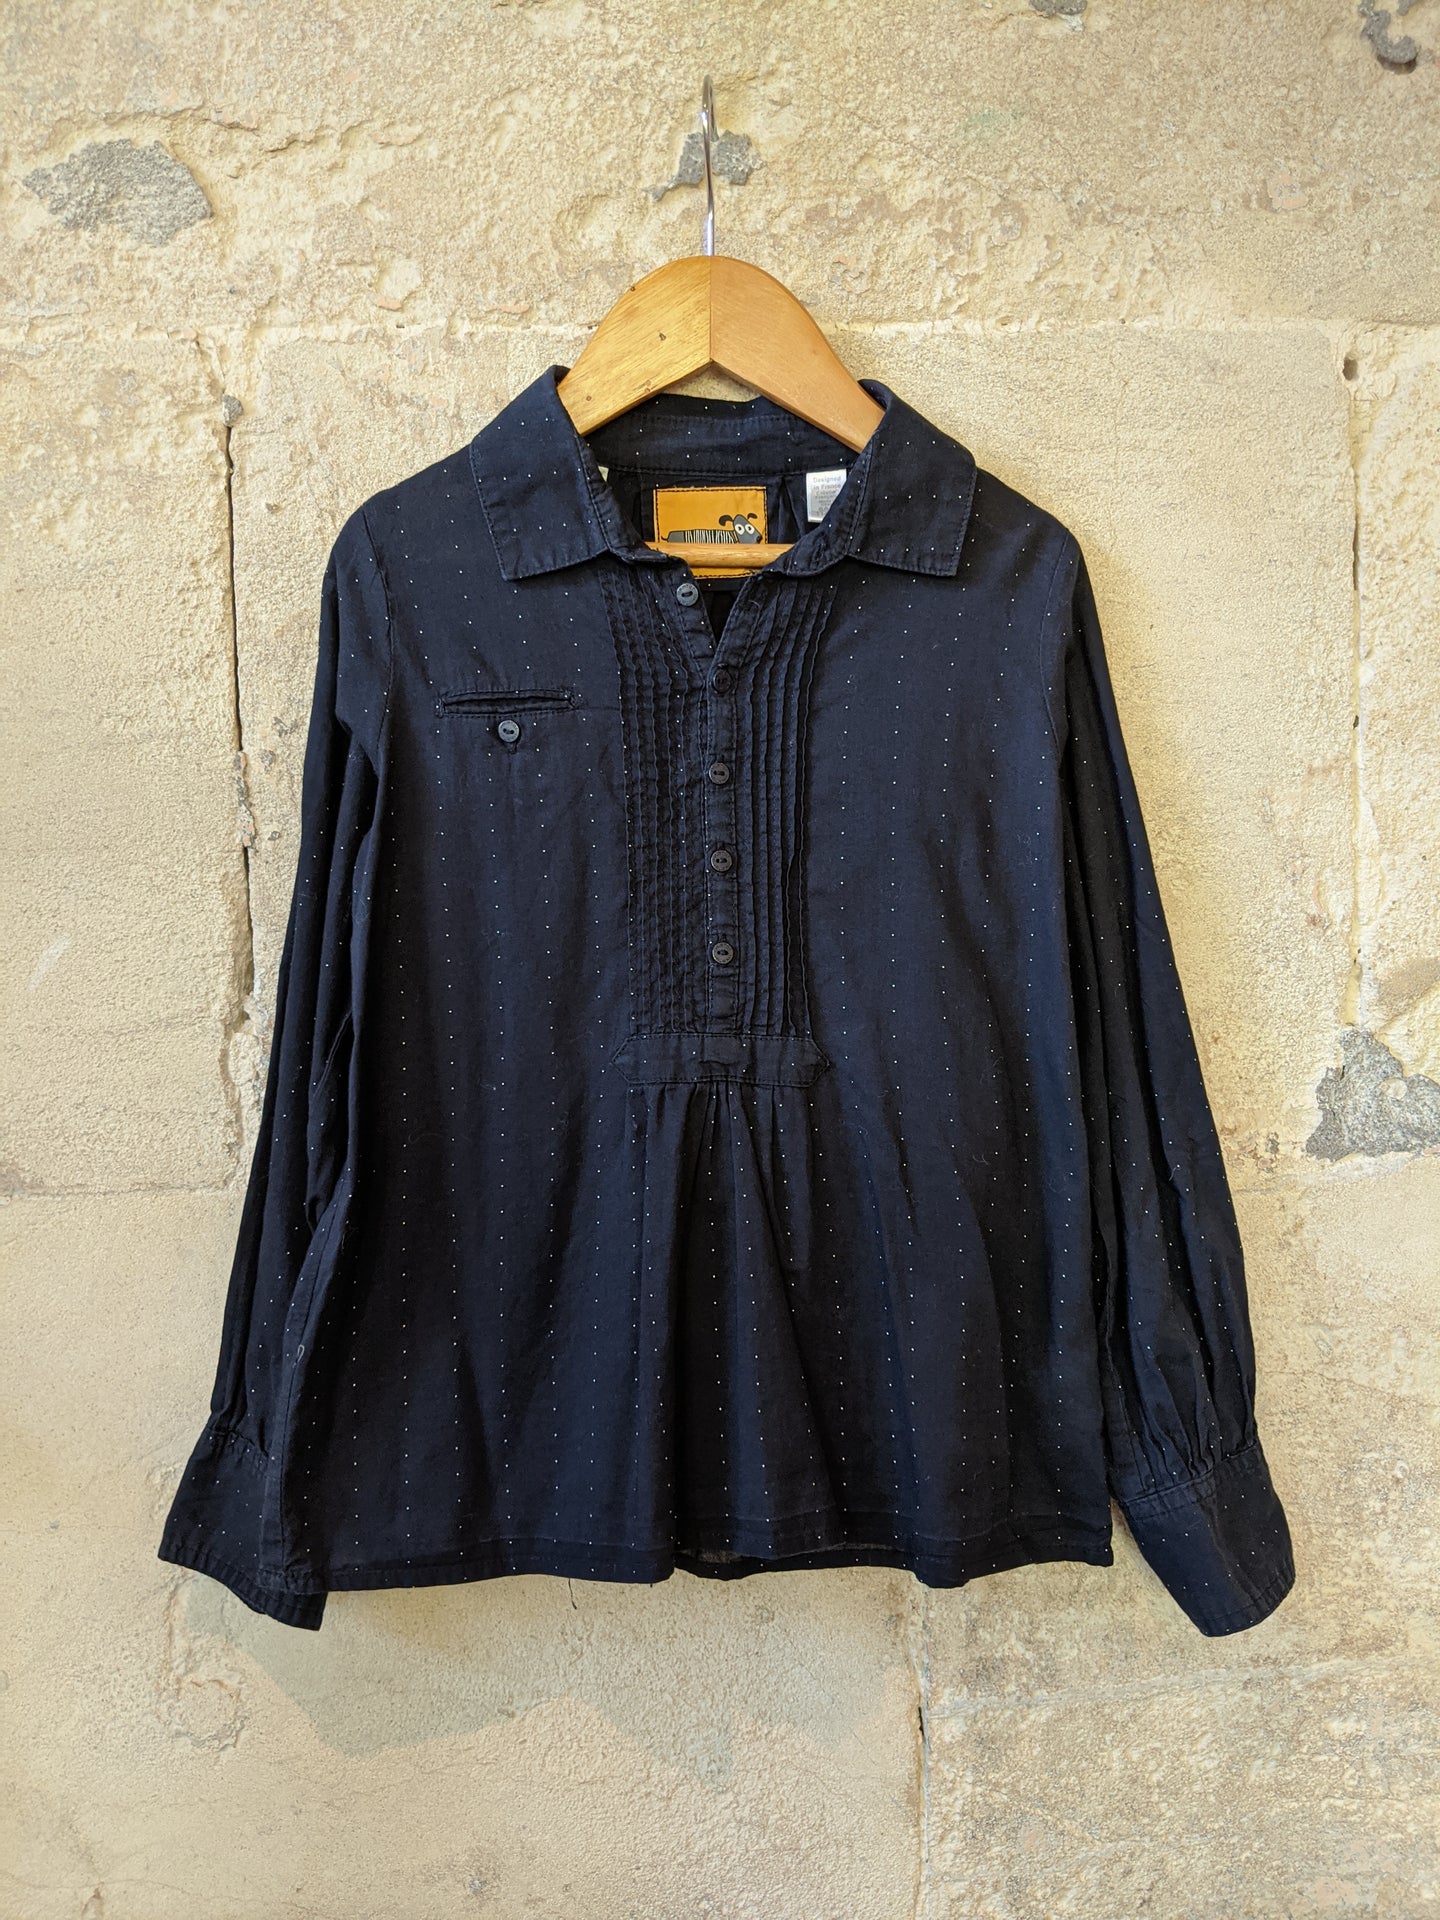 Lovely French Pencil Dot Navy Tunic with Super Cute Buttons - 6 Years